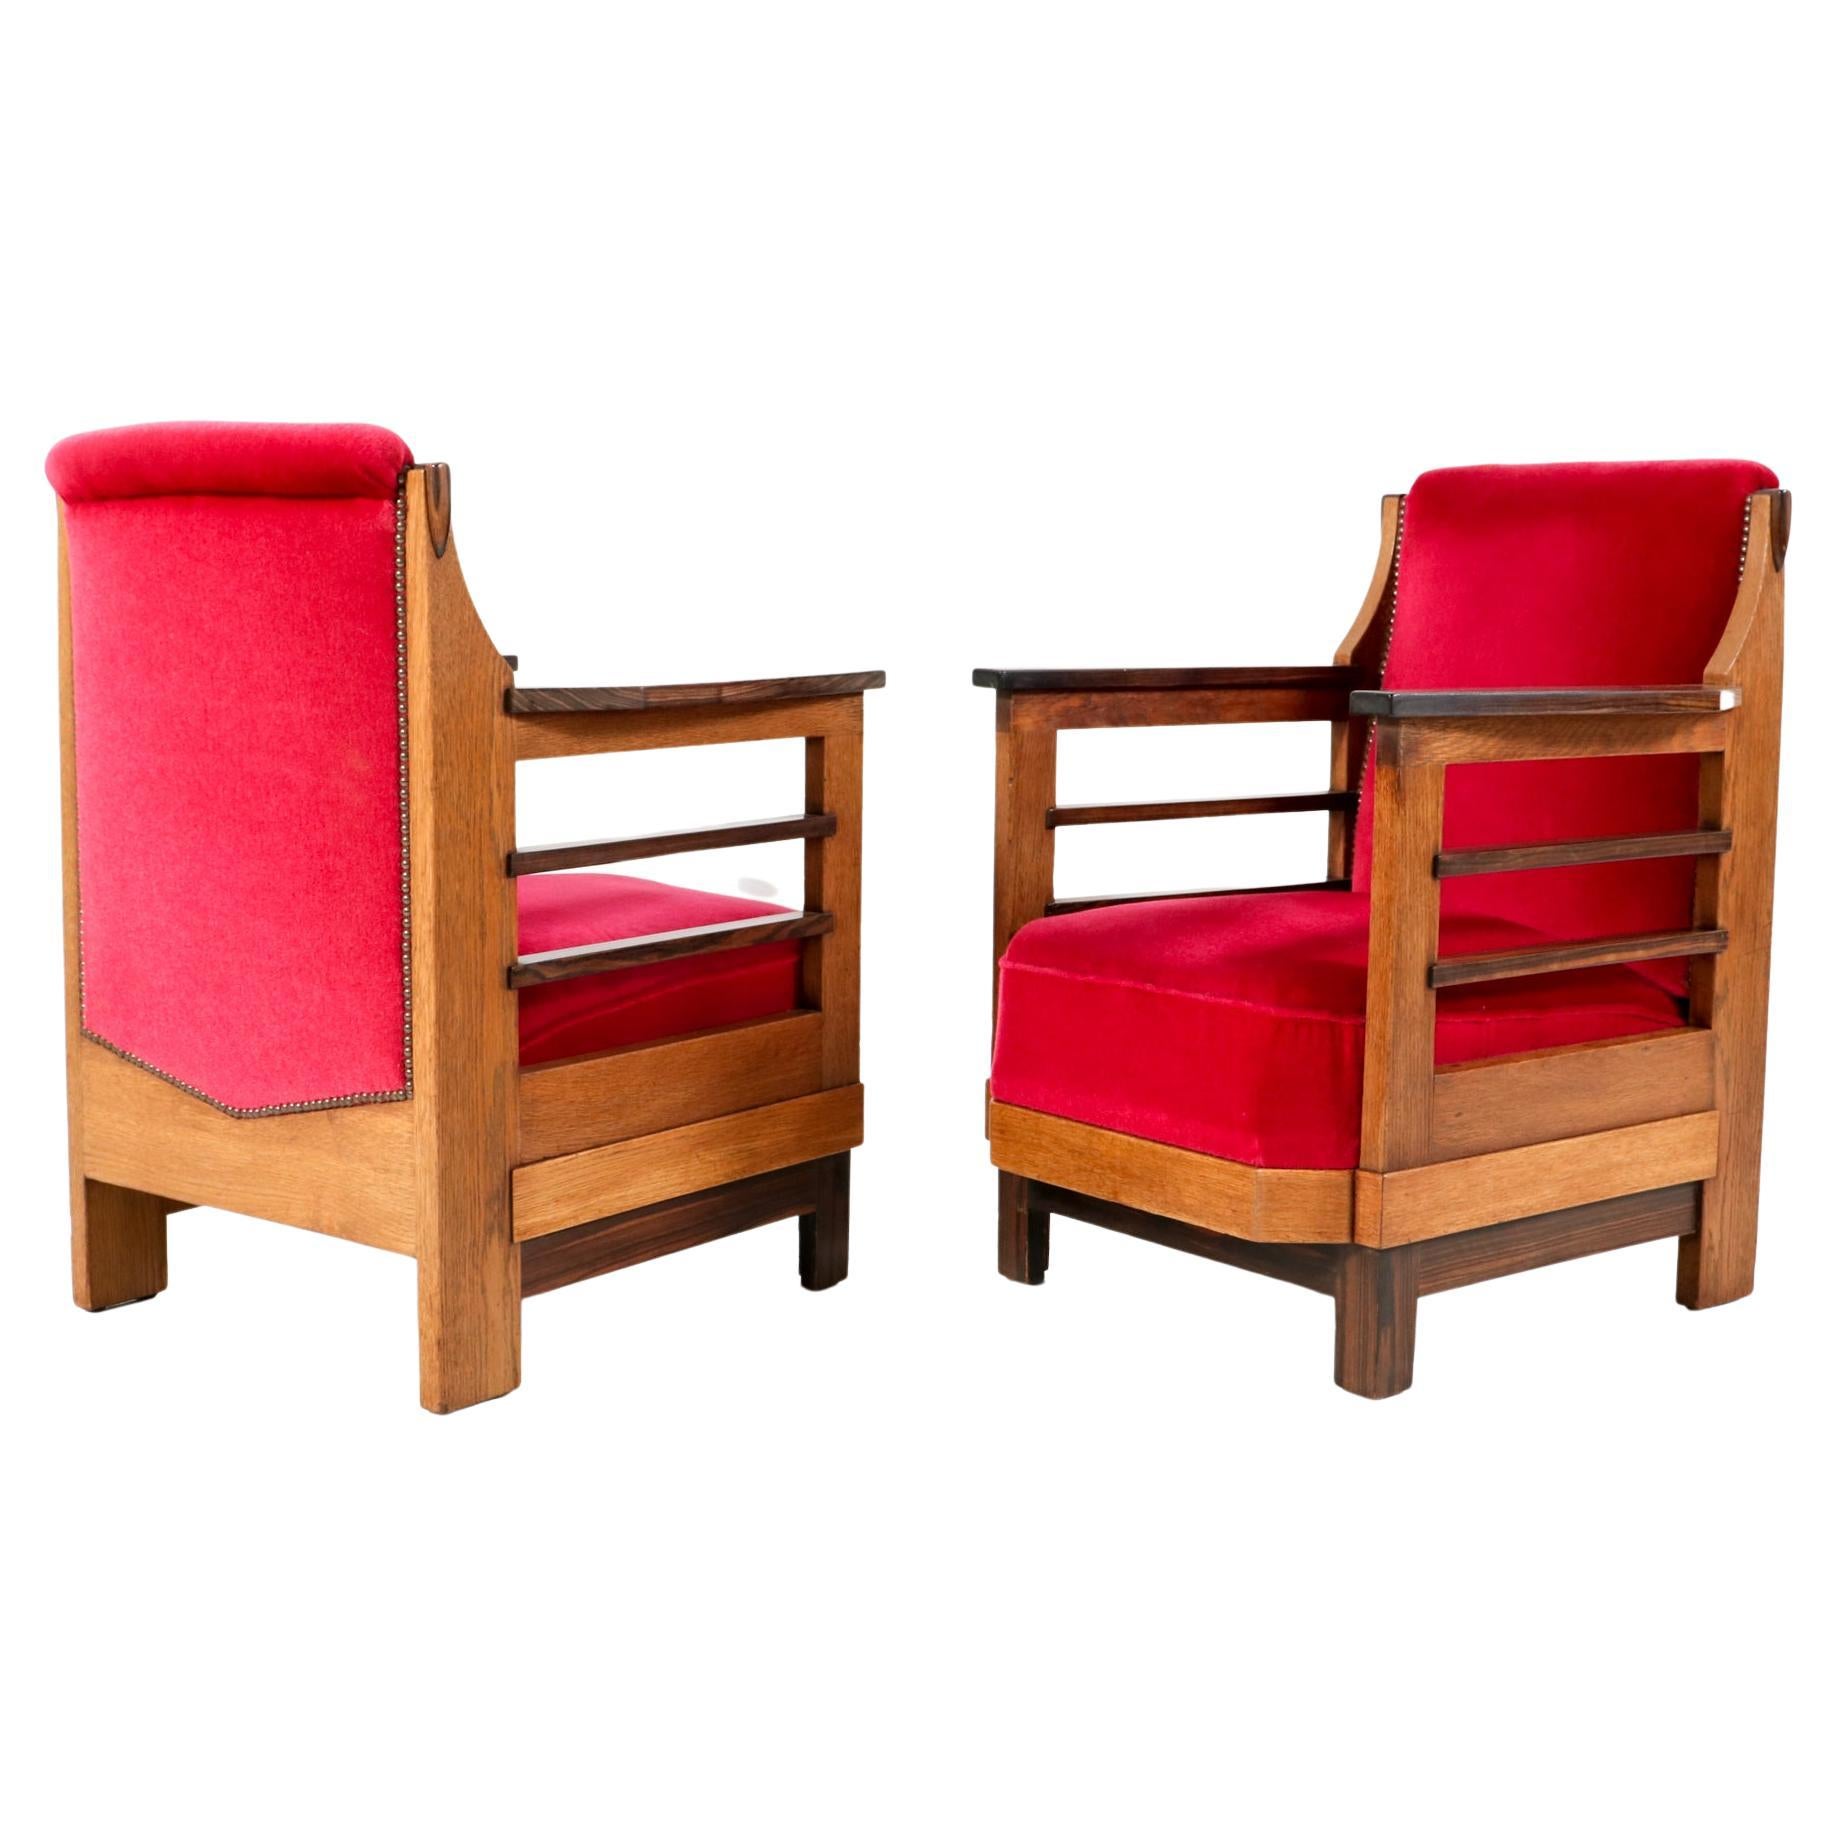 Pair of Art Deco Amsterdamse School Lounge Chairs by Anton Lucas Leiden, 1920s For Sale